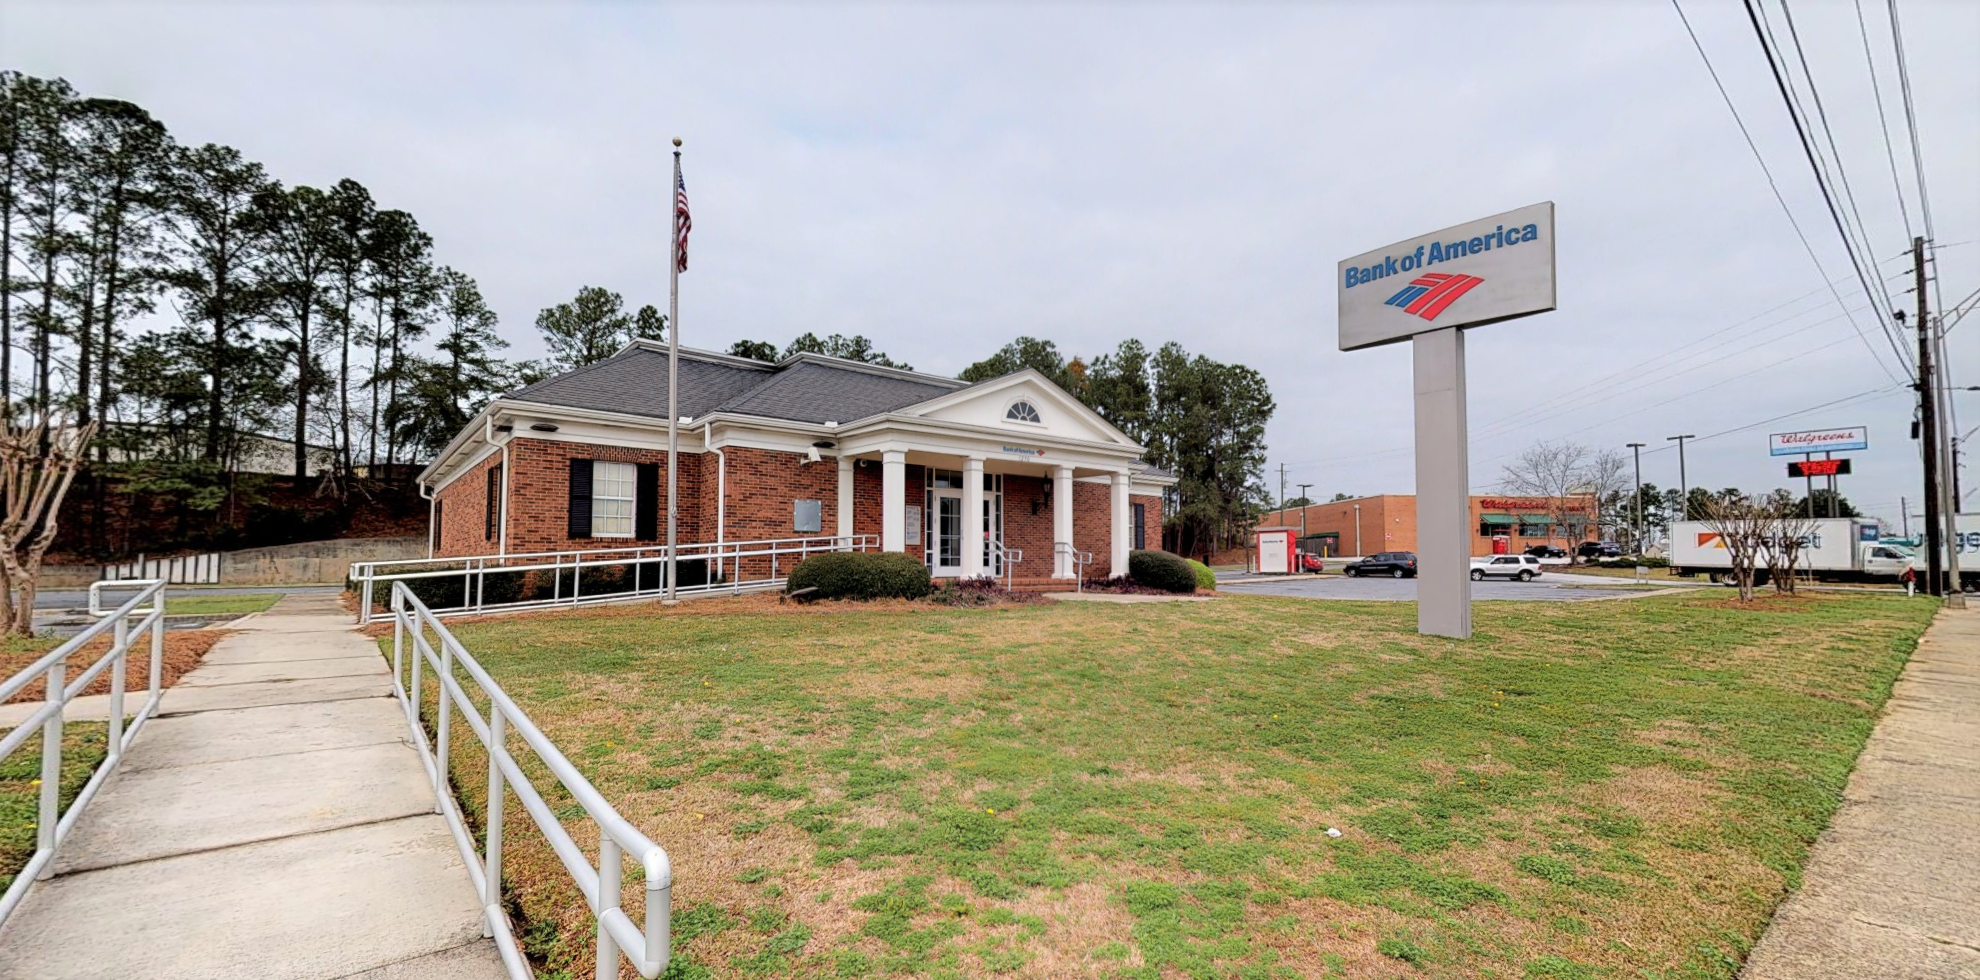 Bank of America financial center with drive-thru ATM and teller | 1250 Gray Hwy, Macon, GA 31211